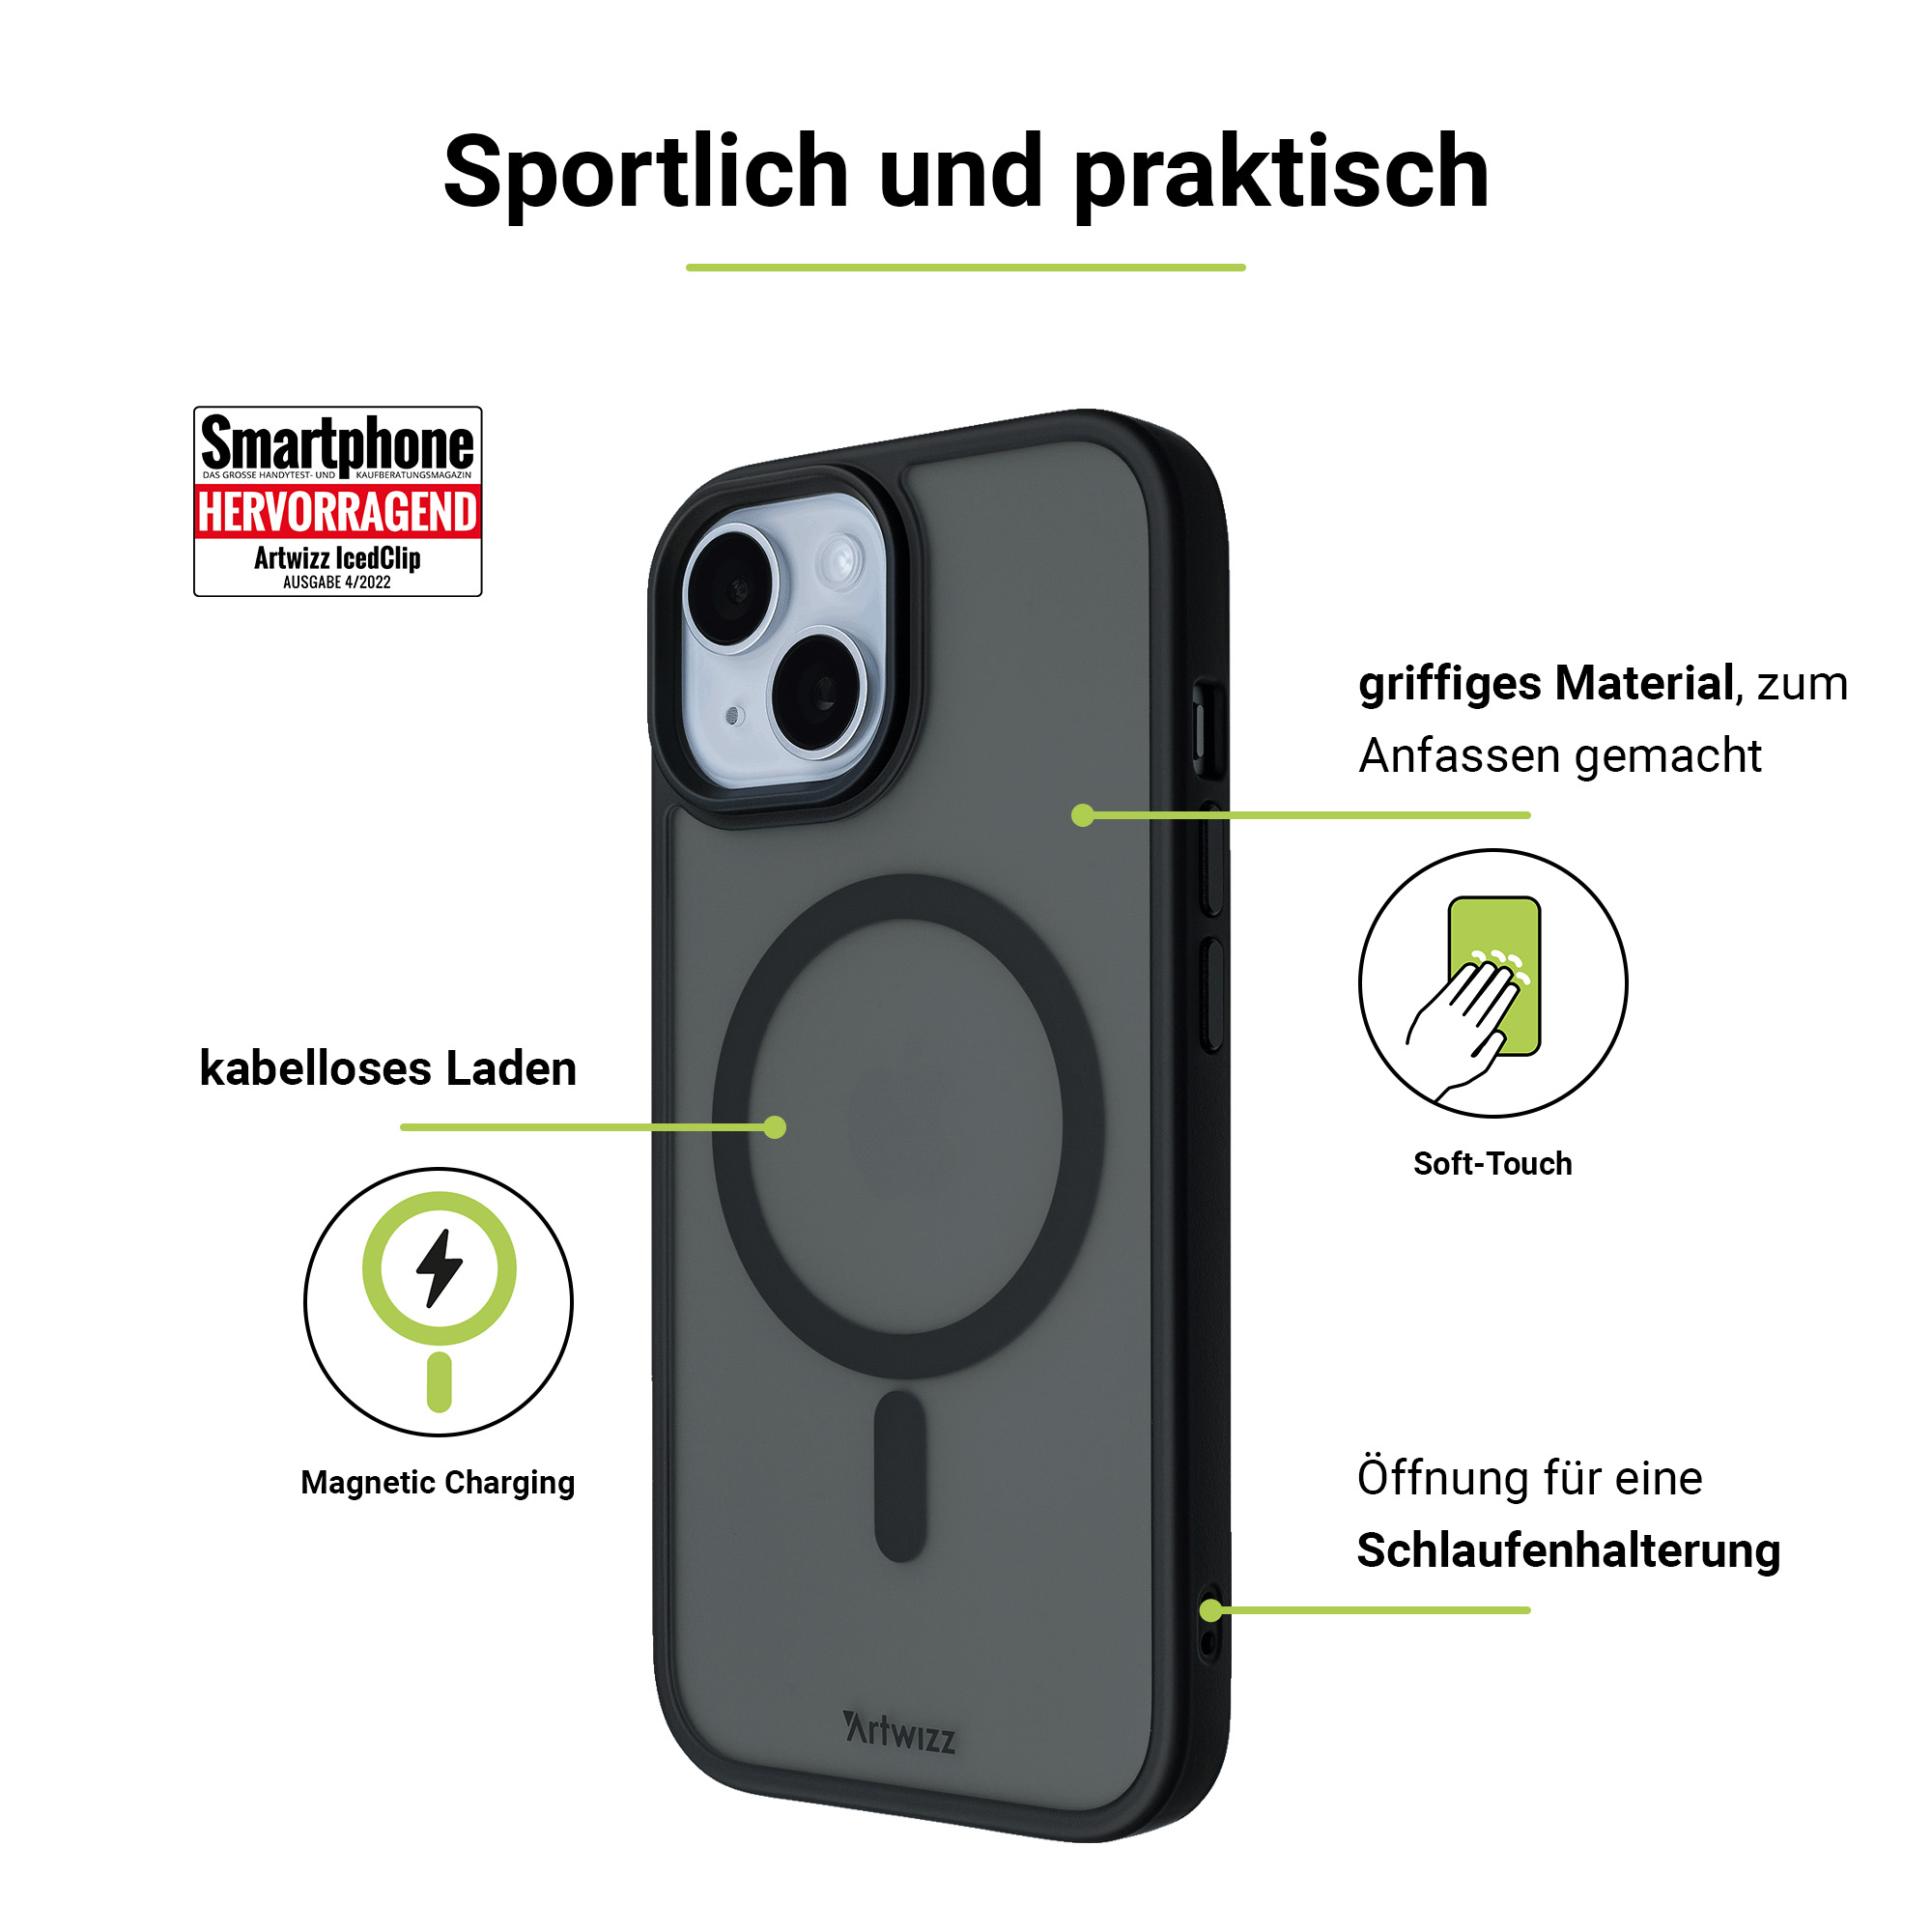 +CHARGE, Schwarz Apple, IcedClip 15, iPhone ARTWIZZ Backcover,